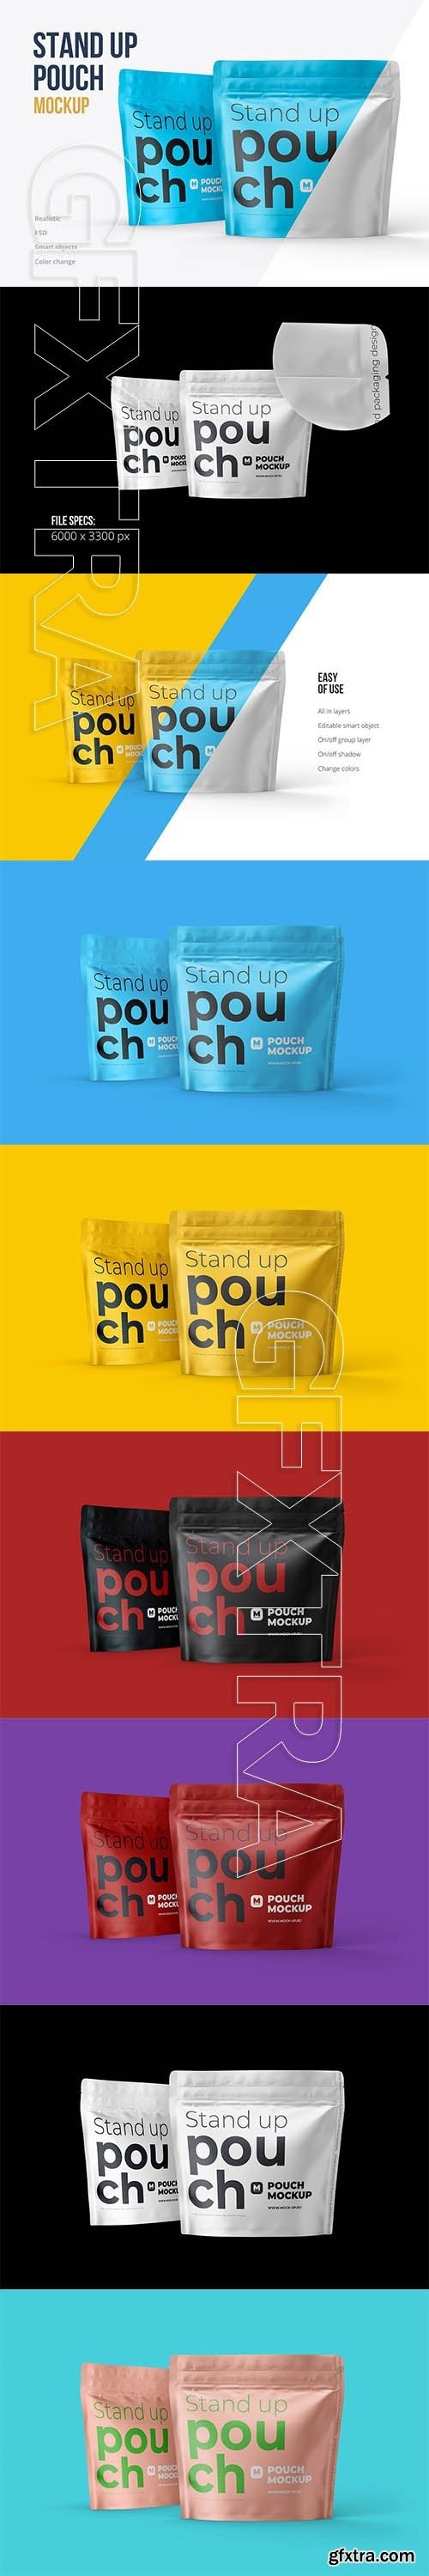 CreativeMarket - Stand-up Pouch Mockup (square) 5110107